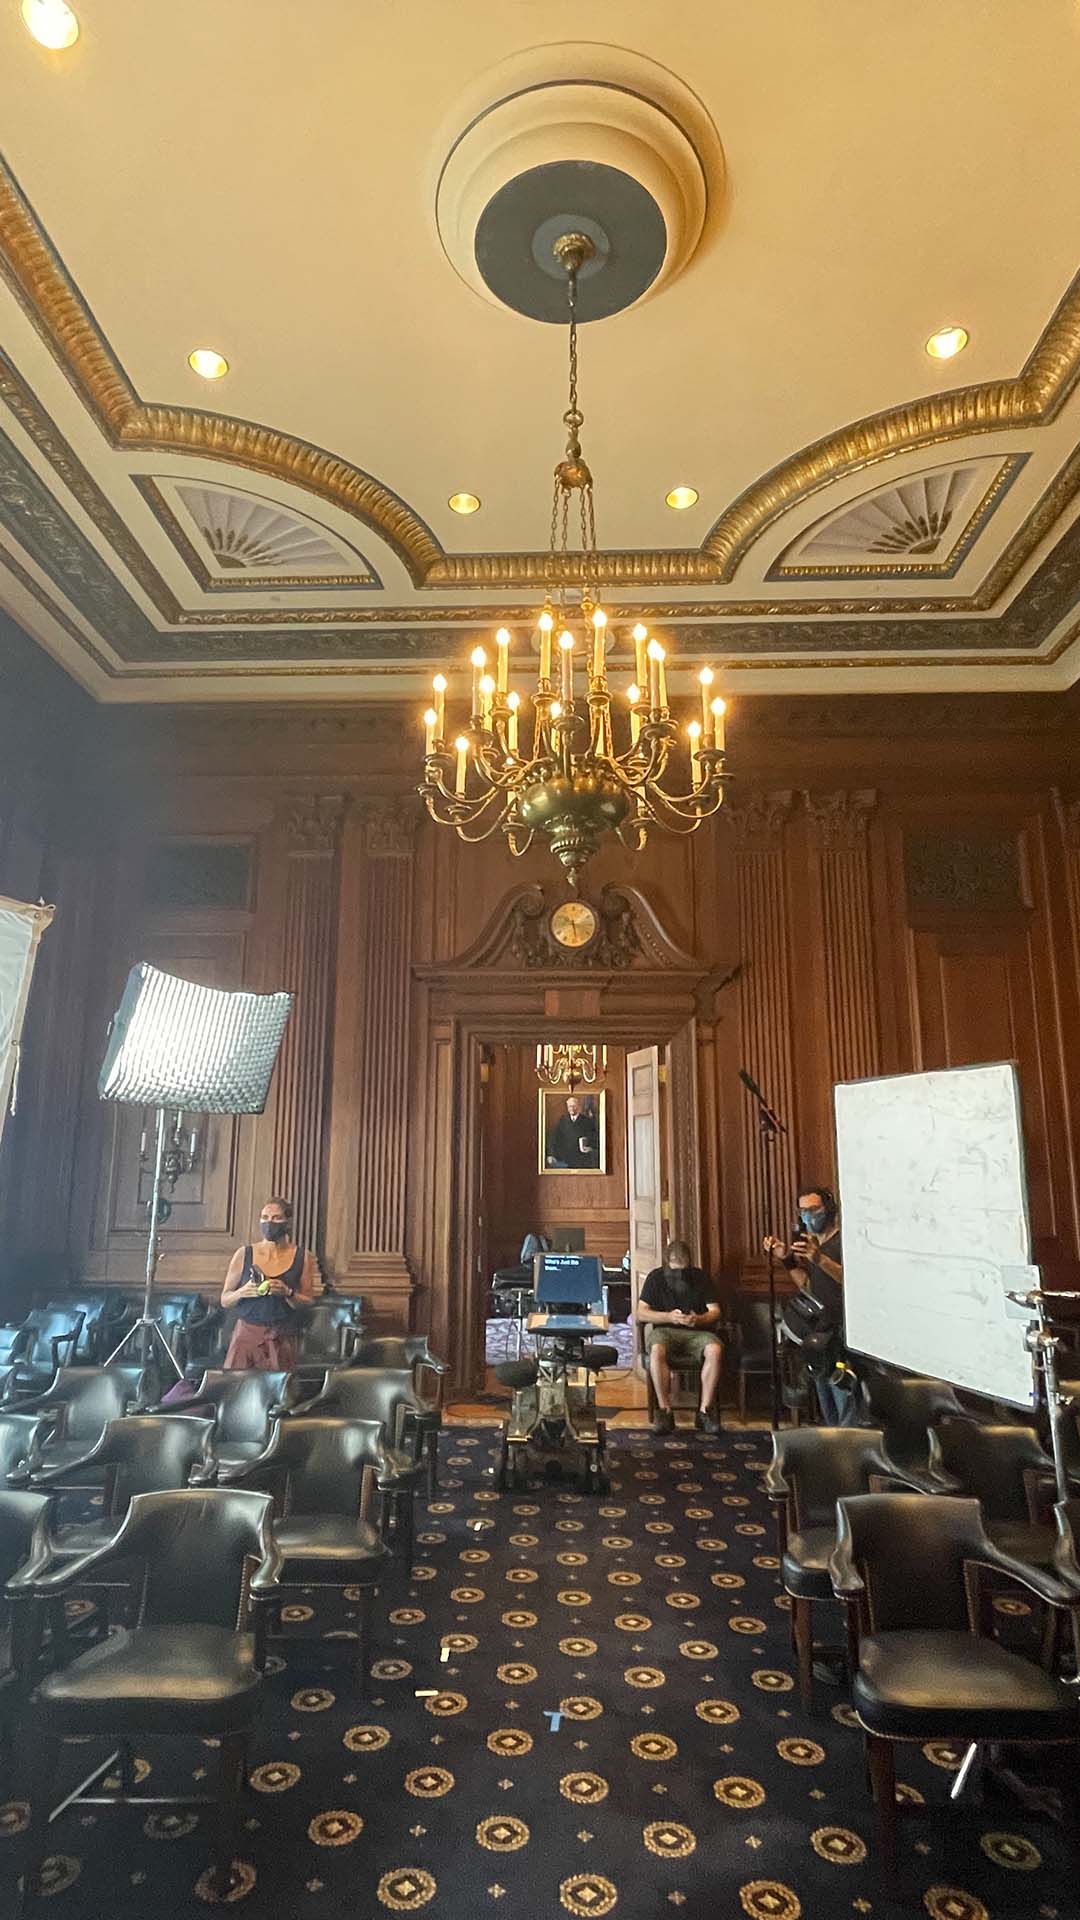 IU Production crew shooting footage in a courtroom